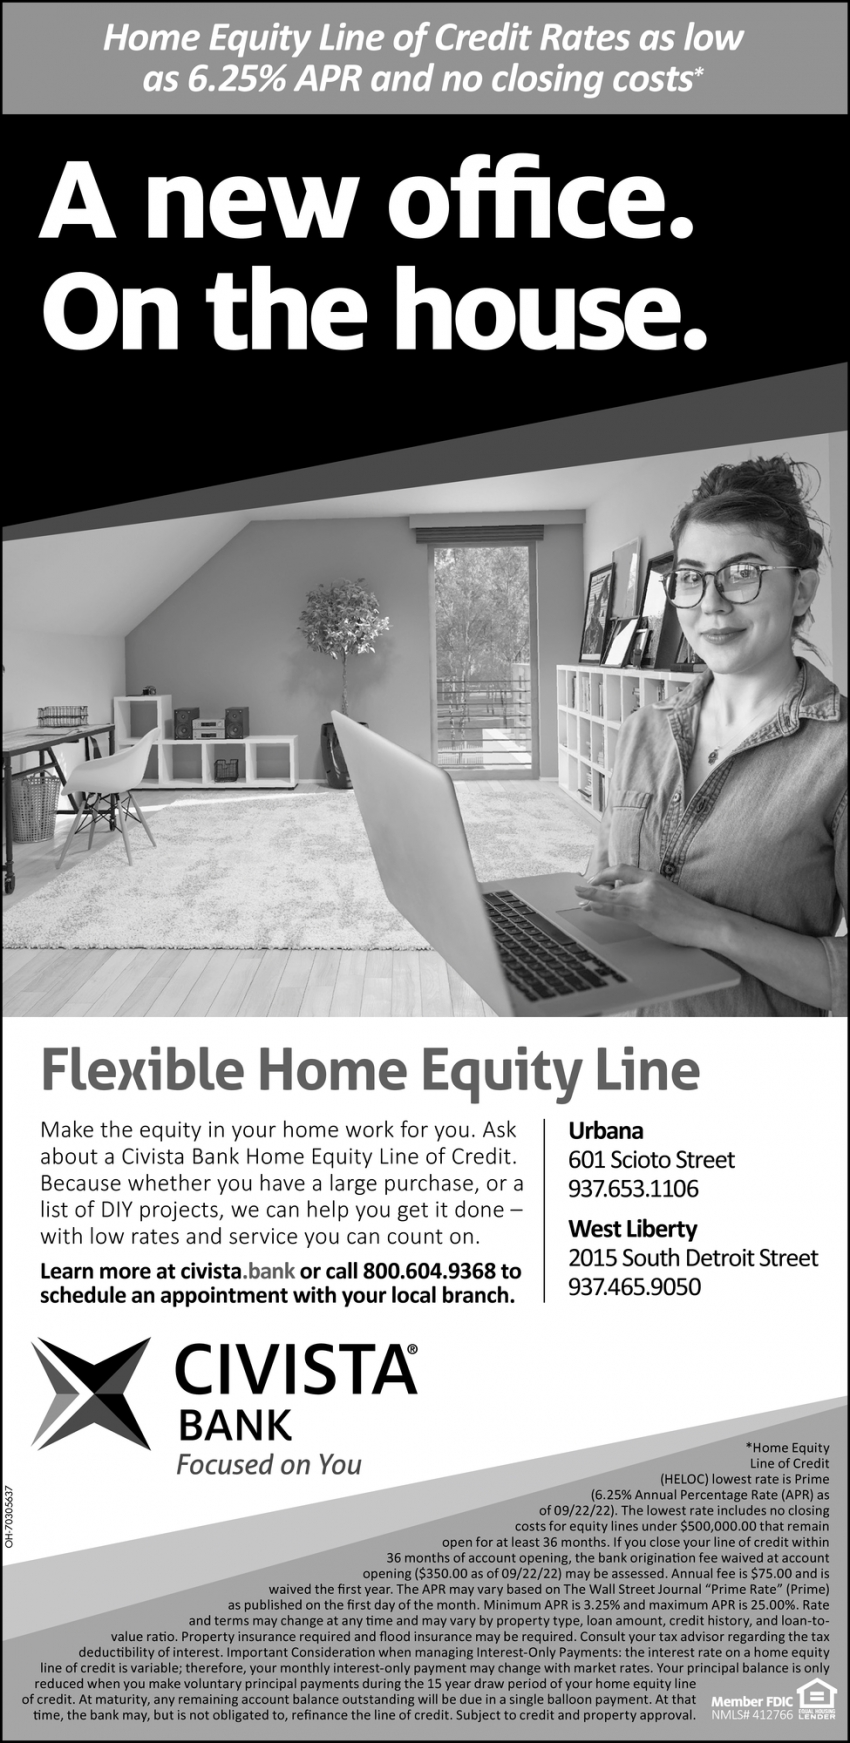 Flexible Home Equity Line